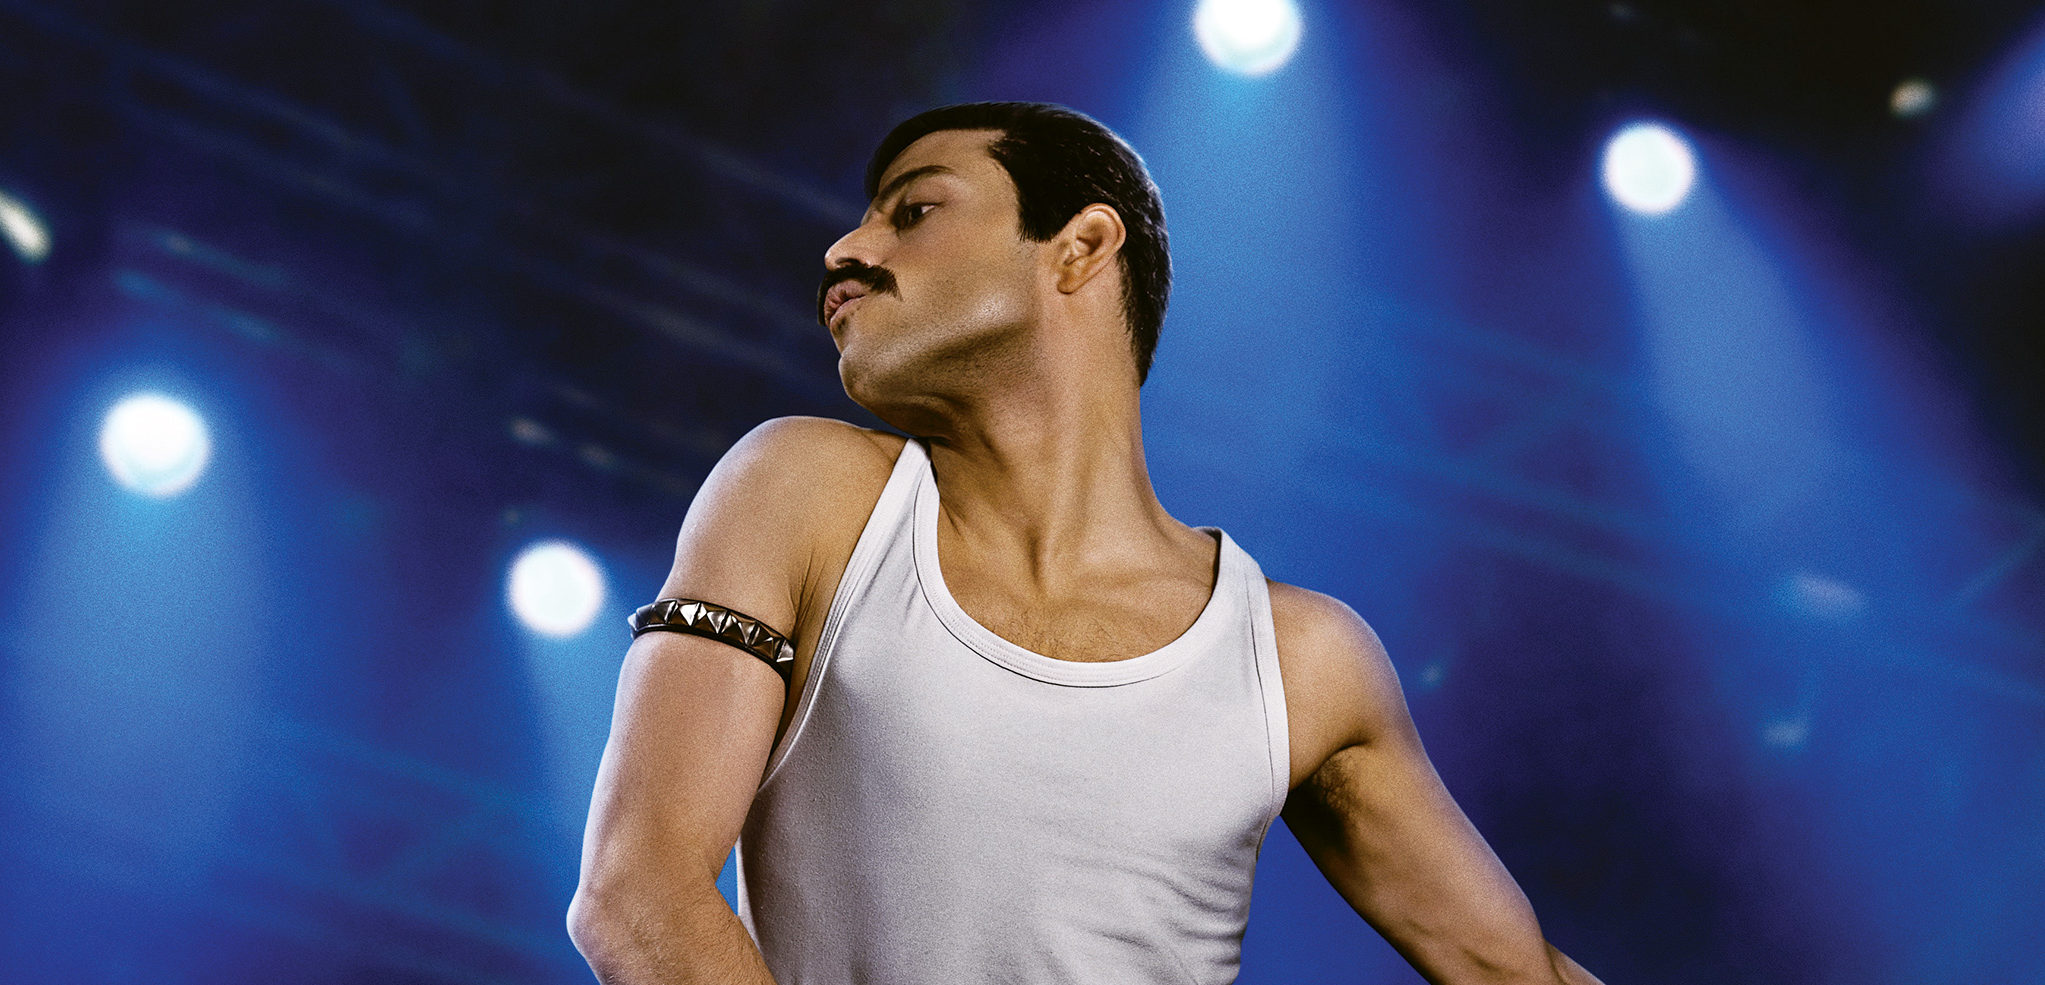 Rami Malek posed as Freddie Mercury in a white tank top and black, spiked armband. He's in front of a blue concert-lit background.